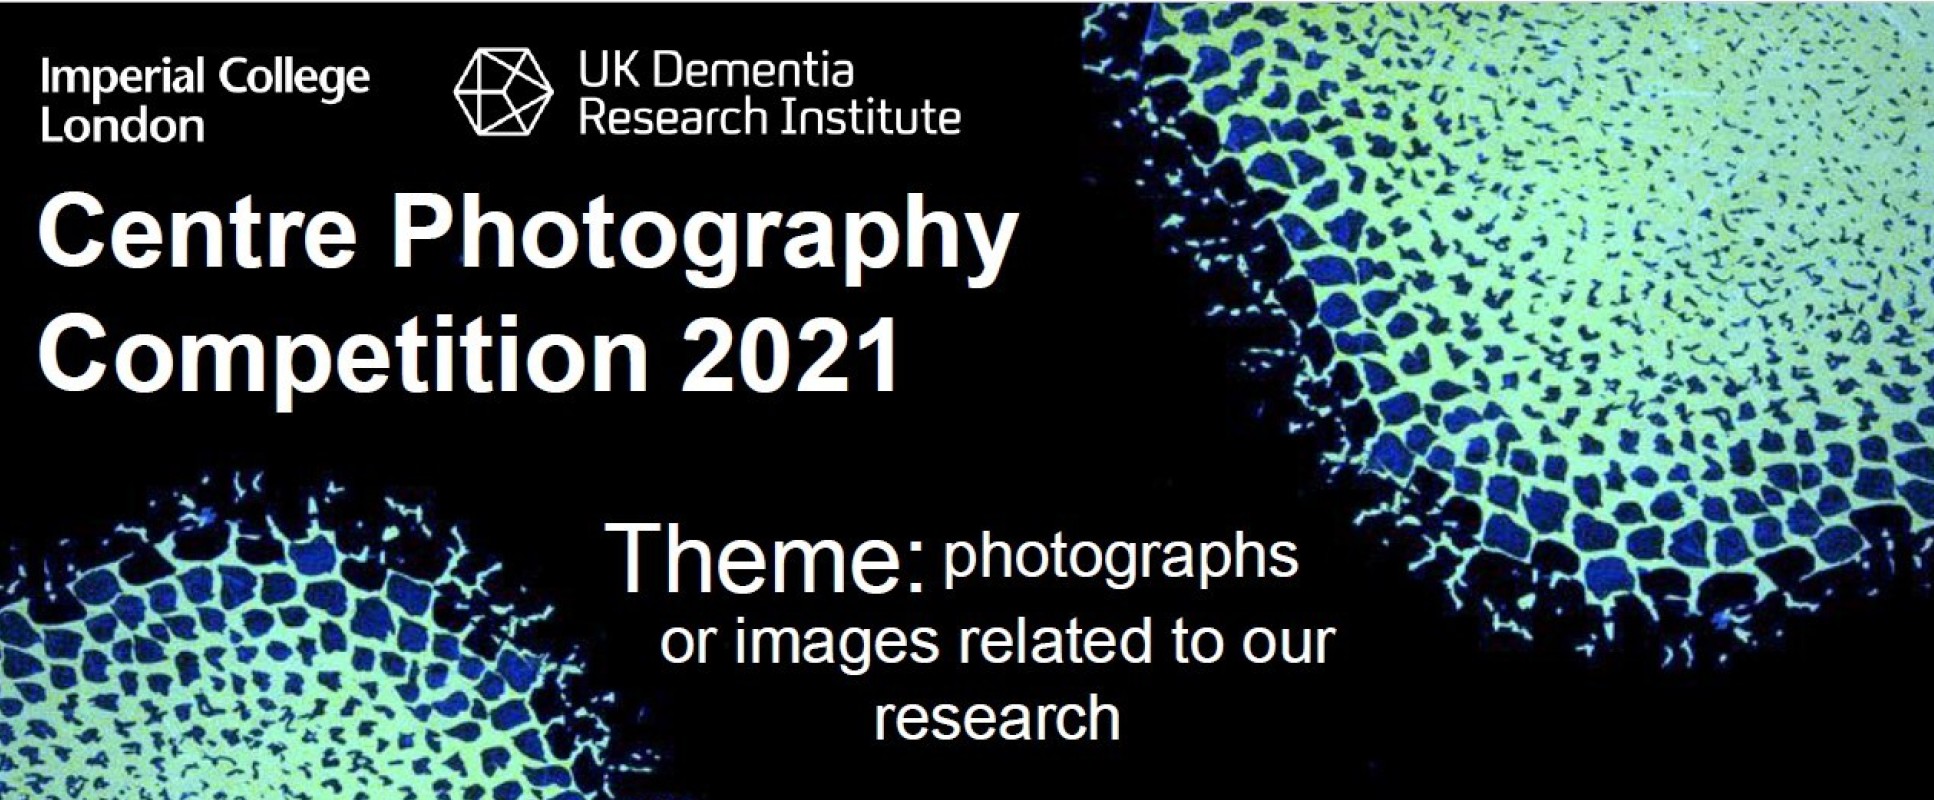 Centre Photography Competition Poster